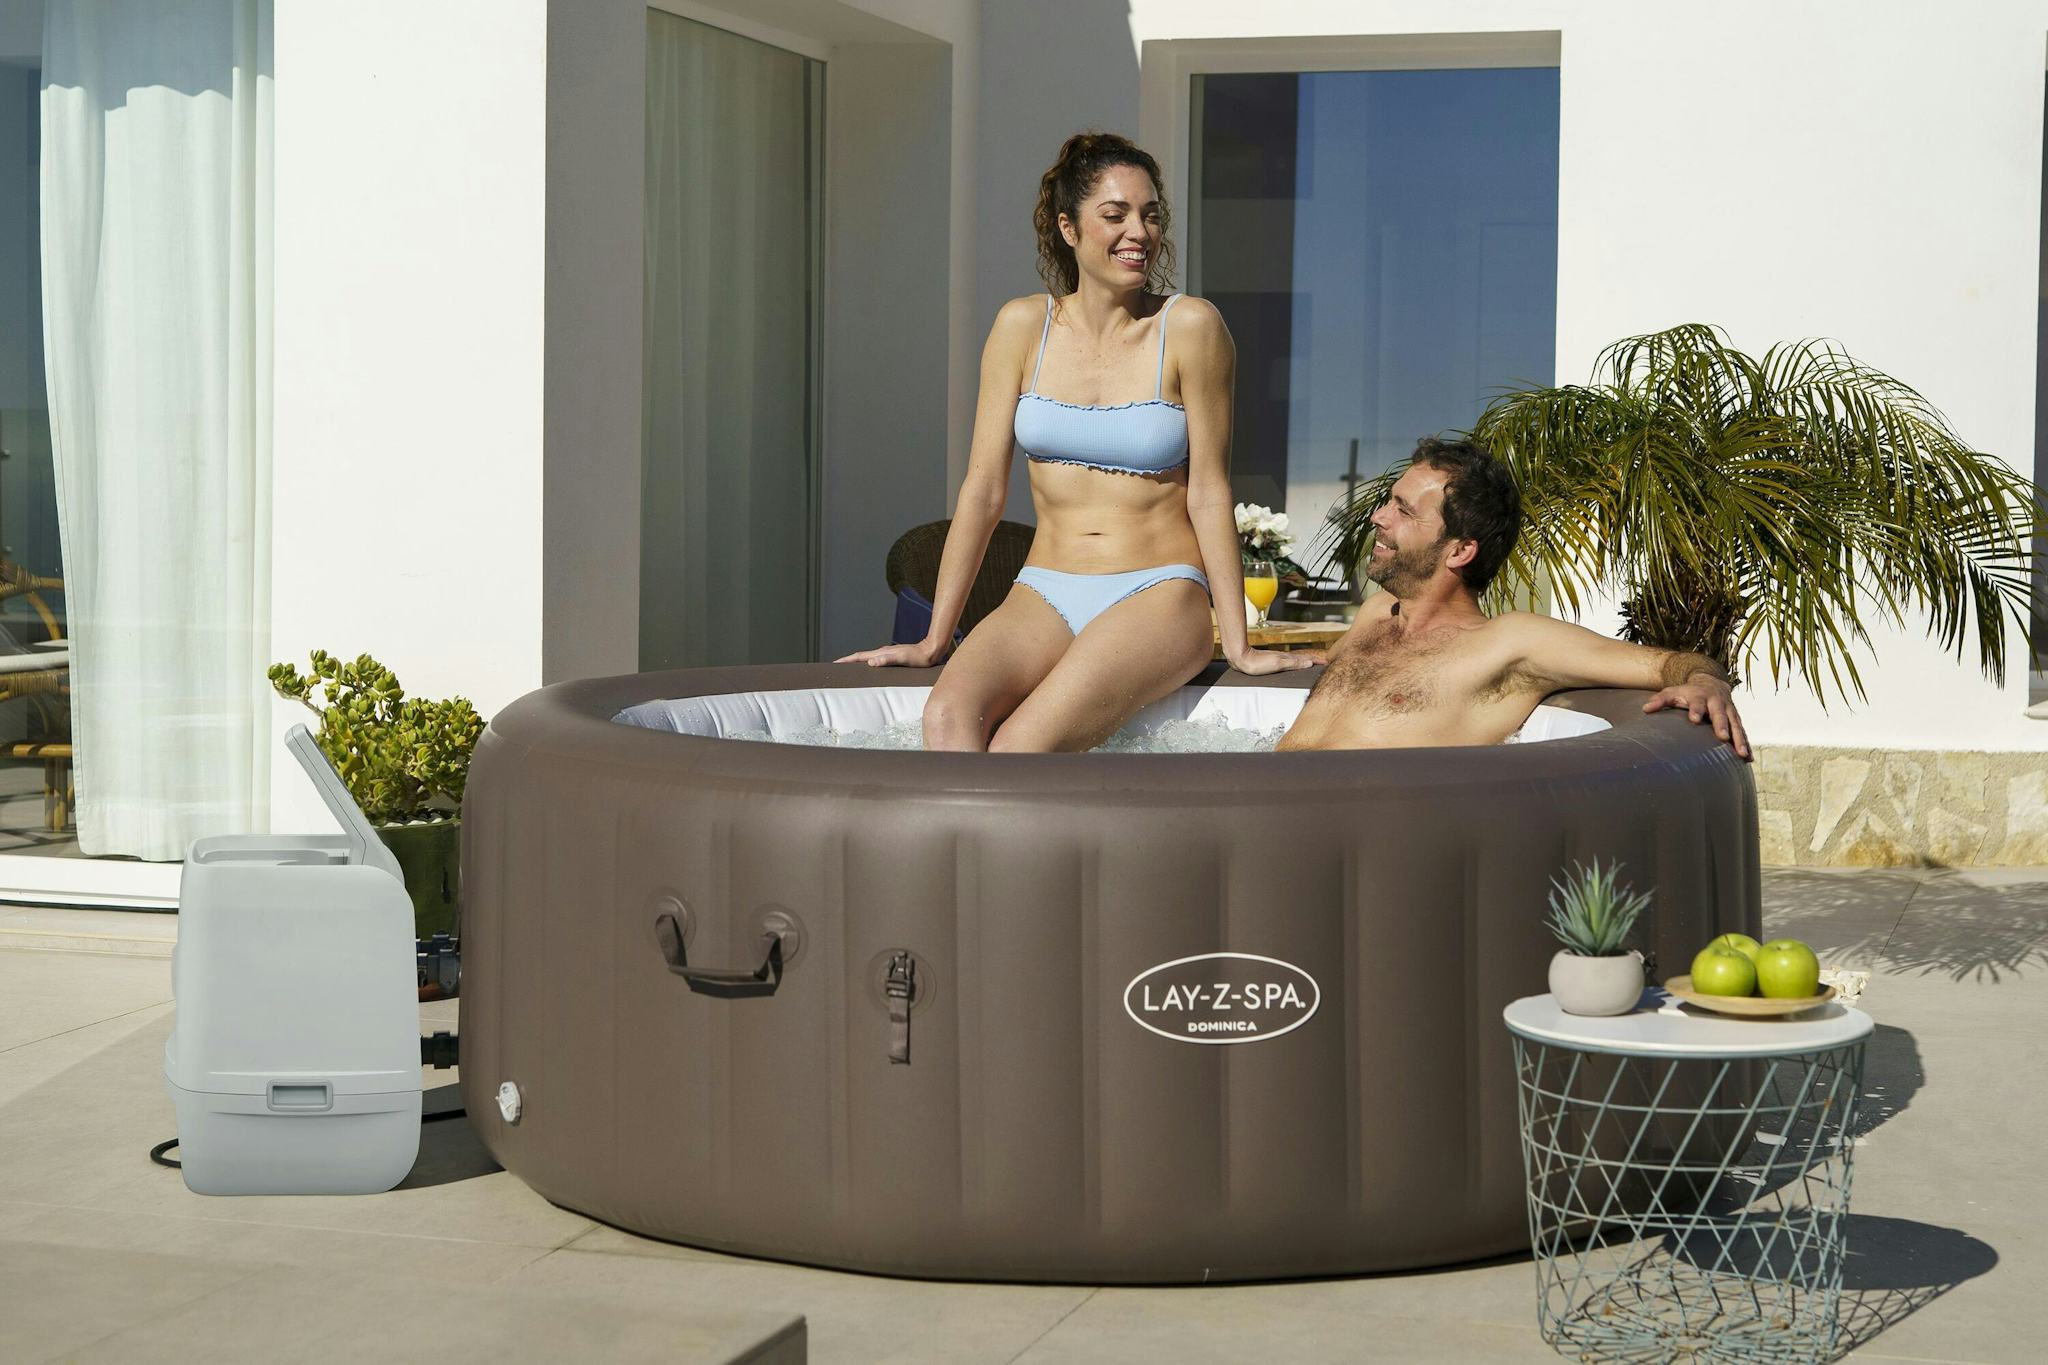 Spas Gonflables Spa gonflable rond Lay-Z-Spa Dominica Hydrojet™ 4-6 places Bestway 6